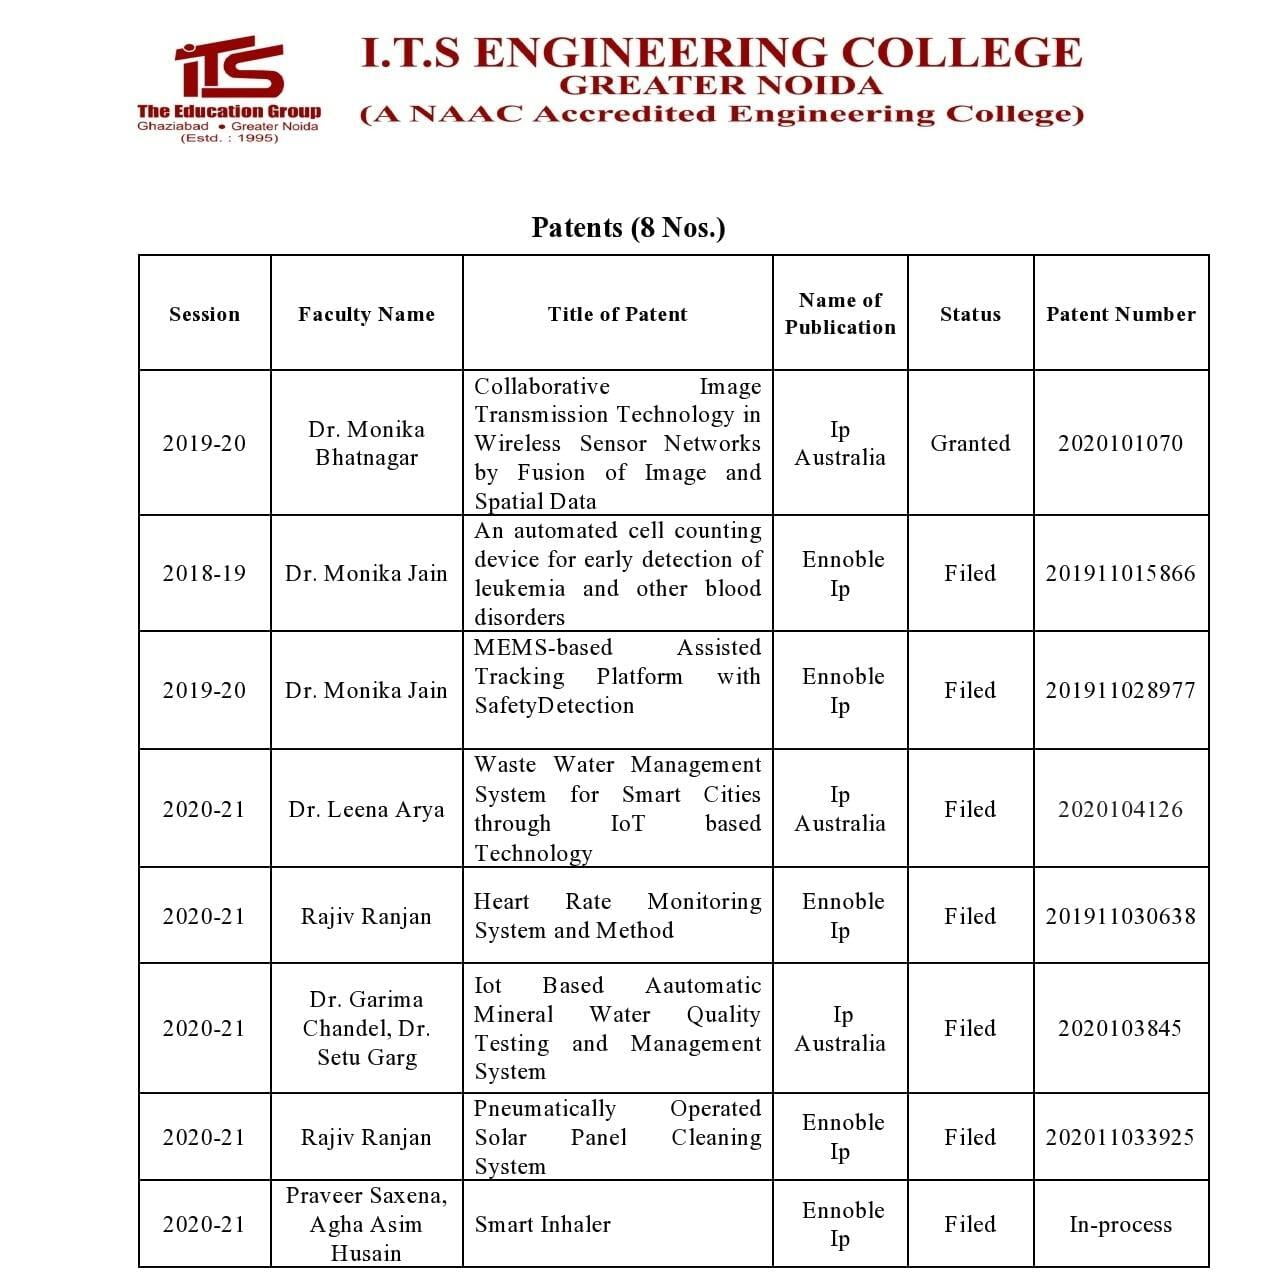 Research Papers List Electronics & Communication Engineering